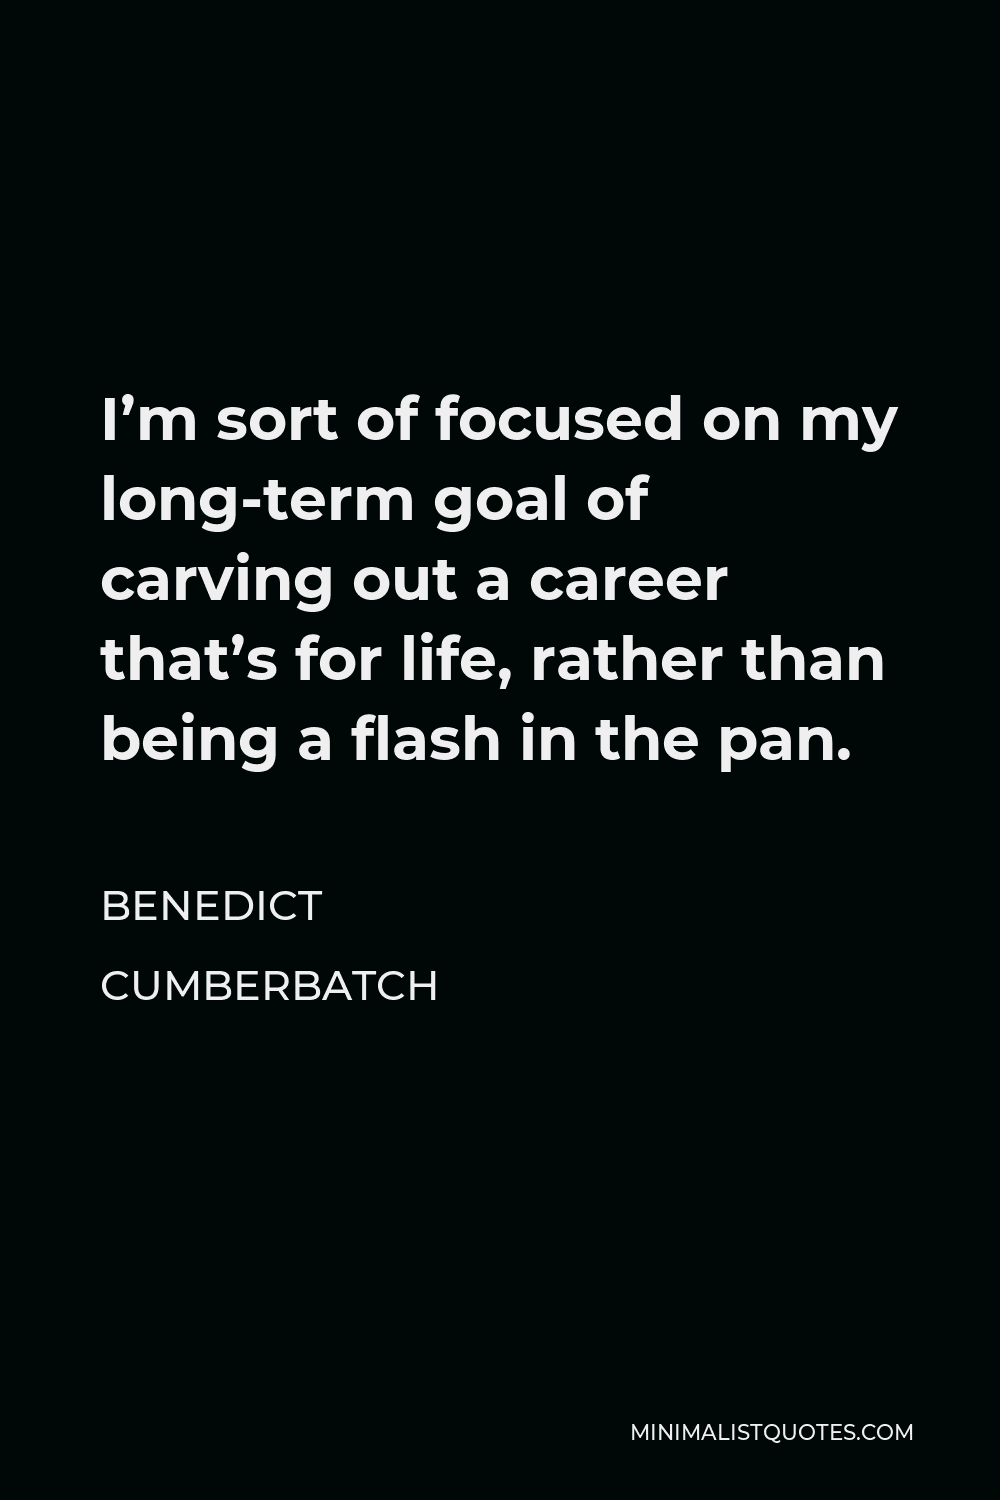 Benedict Cumberbatch Quote - I’m sort of focused on my long-term goal of carving out a career that’s for life, rather than being a flash in the pan.